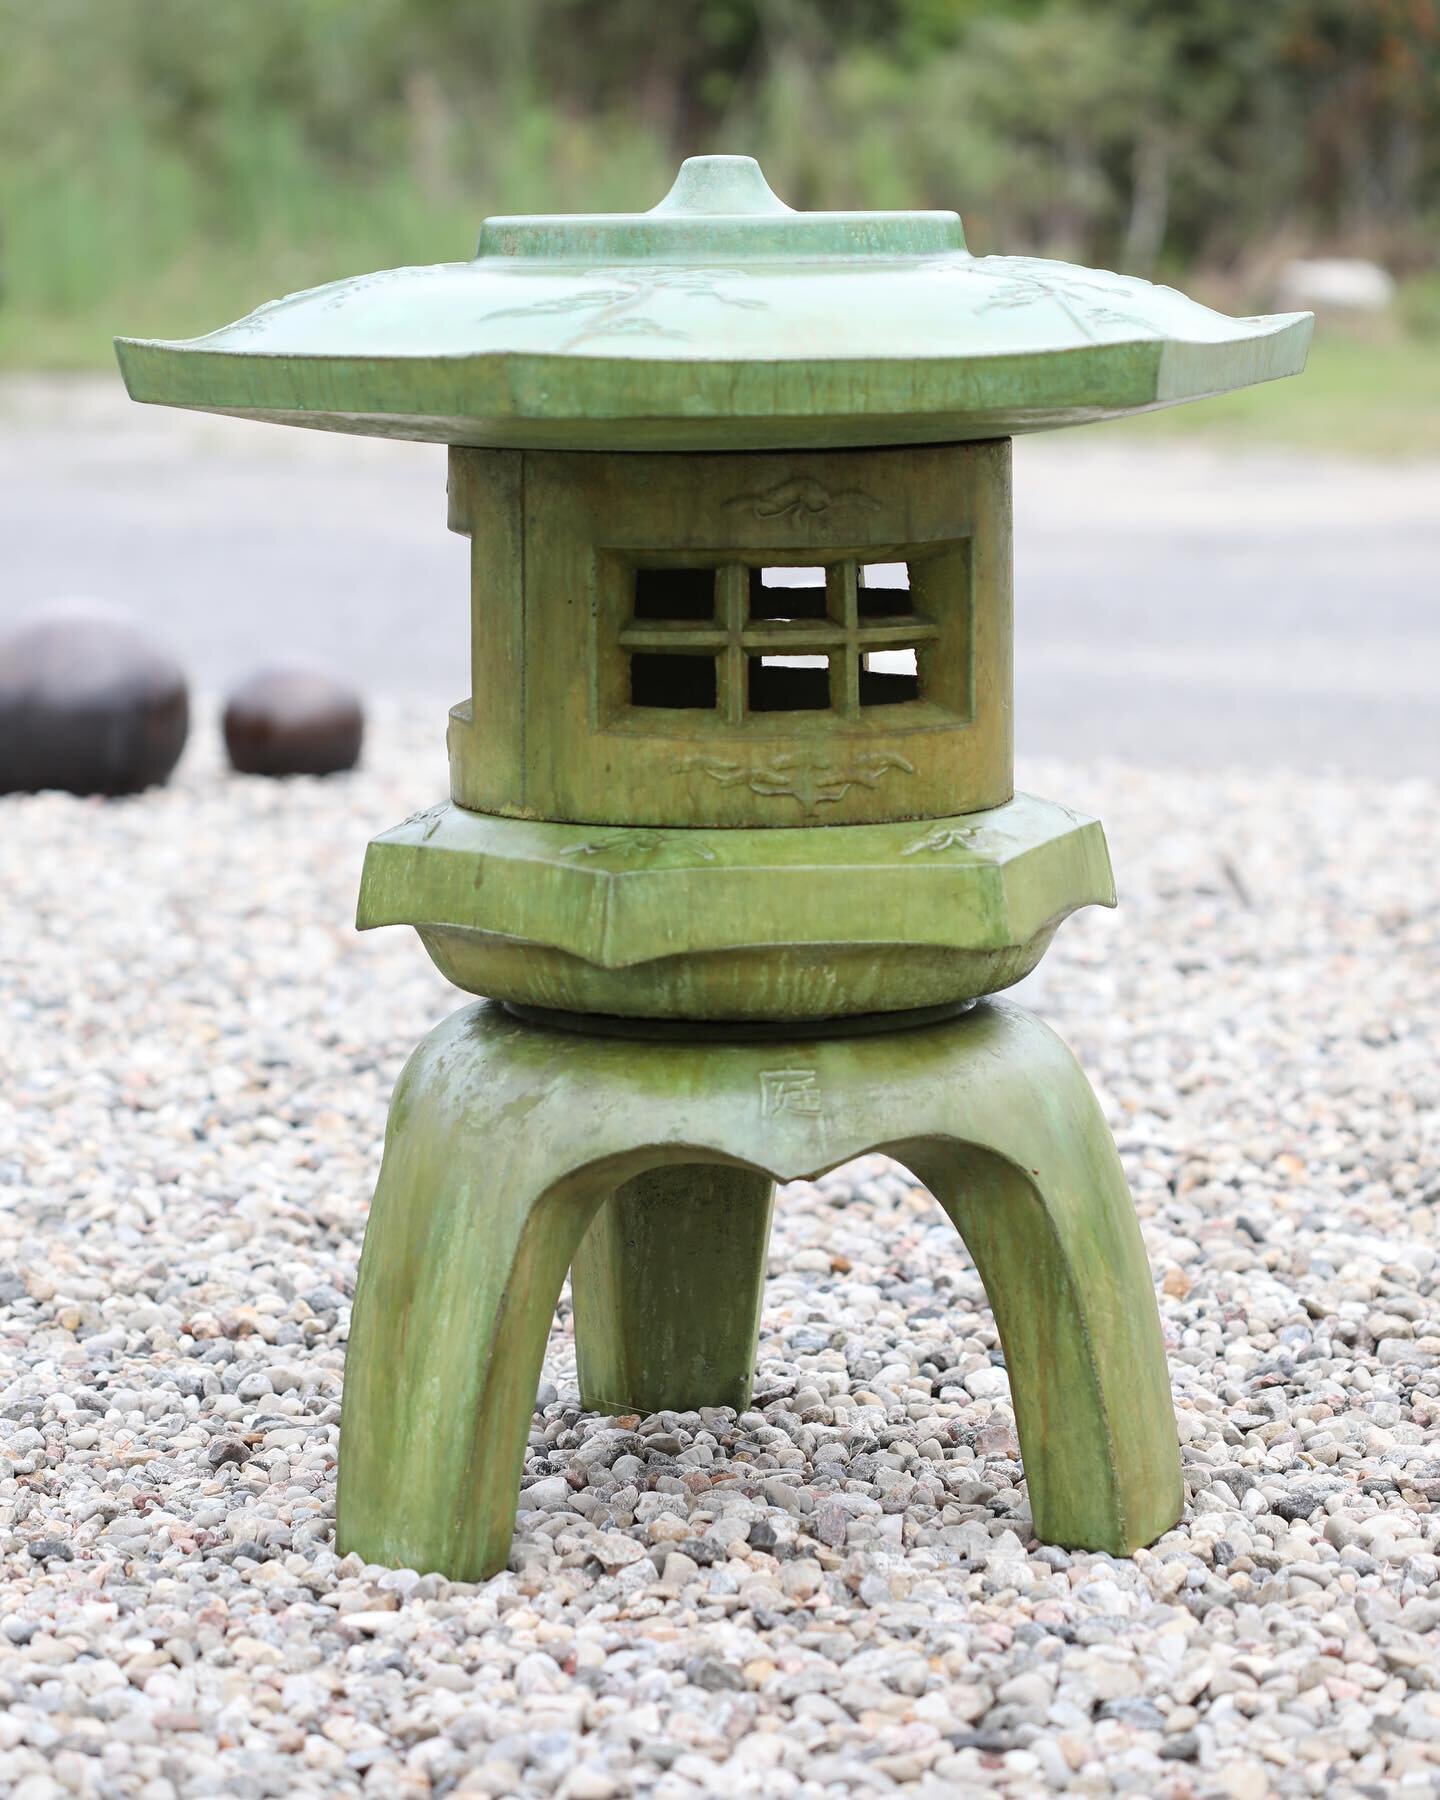 The Kyoto Lantern shown in 2 colour stains. We love how different colours enhance the same piece in unique ways.

&bull;Kyoto Yukimi-dōrō/ Tree Lantern - 4 pieces
&bull;30&rdquo;W (top) x 33&rdquo;H
&bull;Stains shown: Moss/Fern and Espresso Brown

&